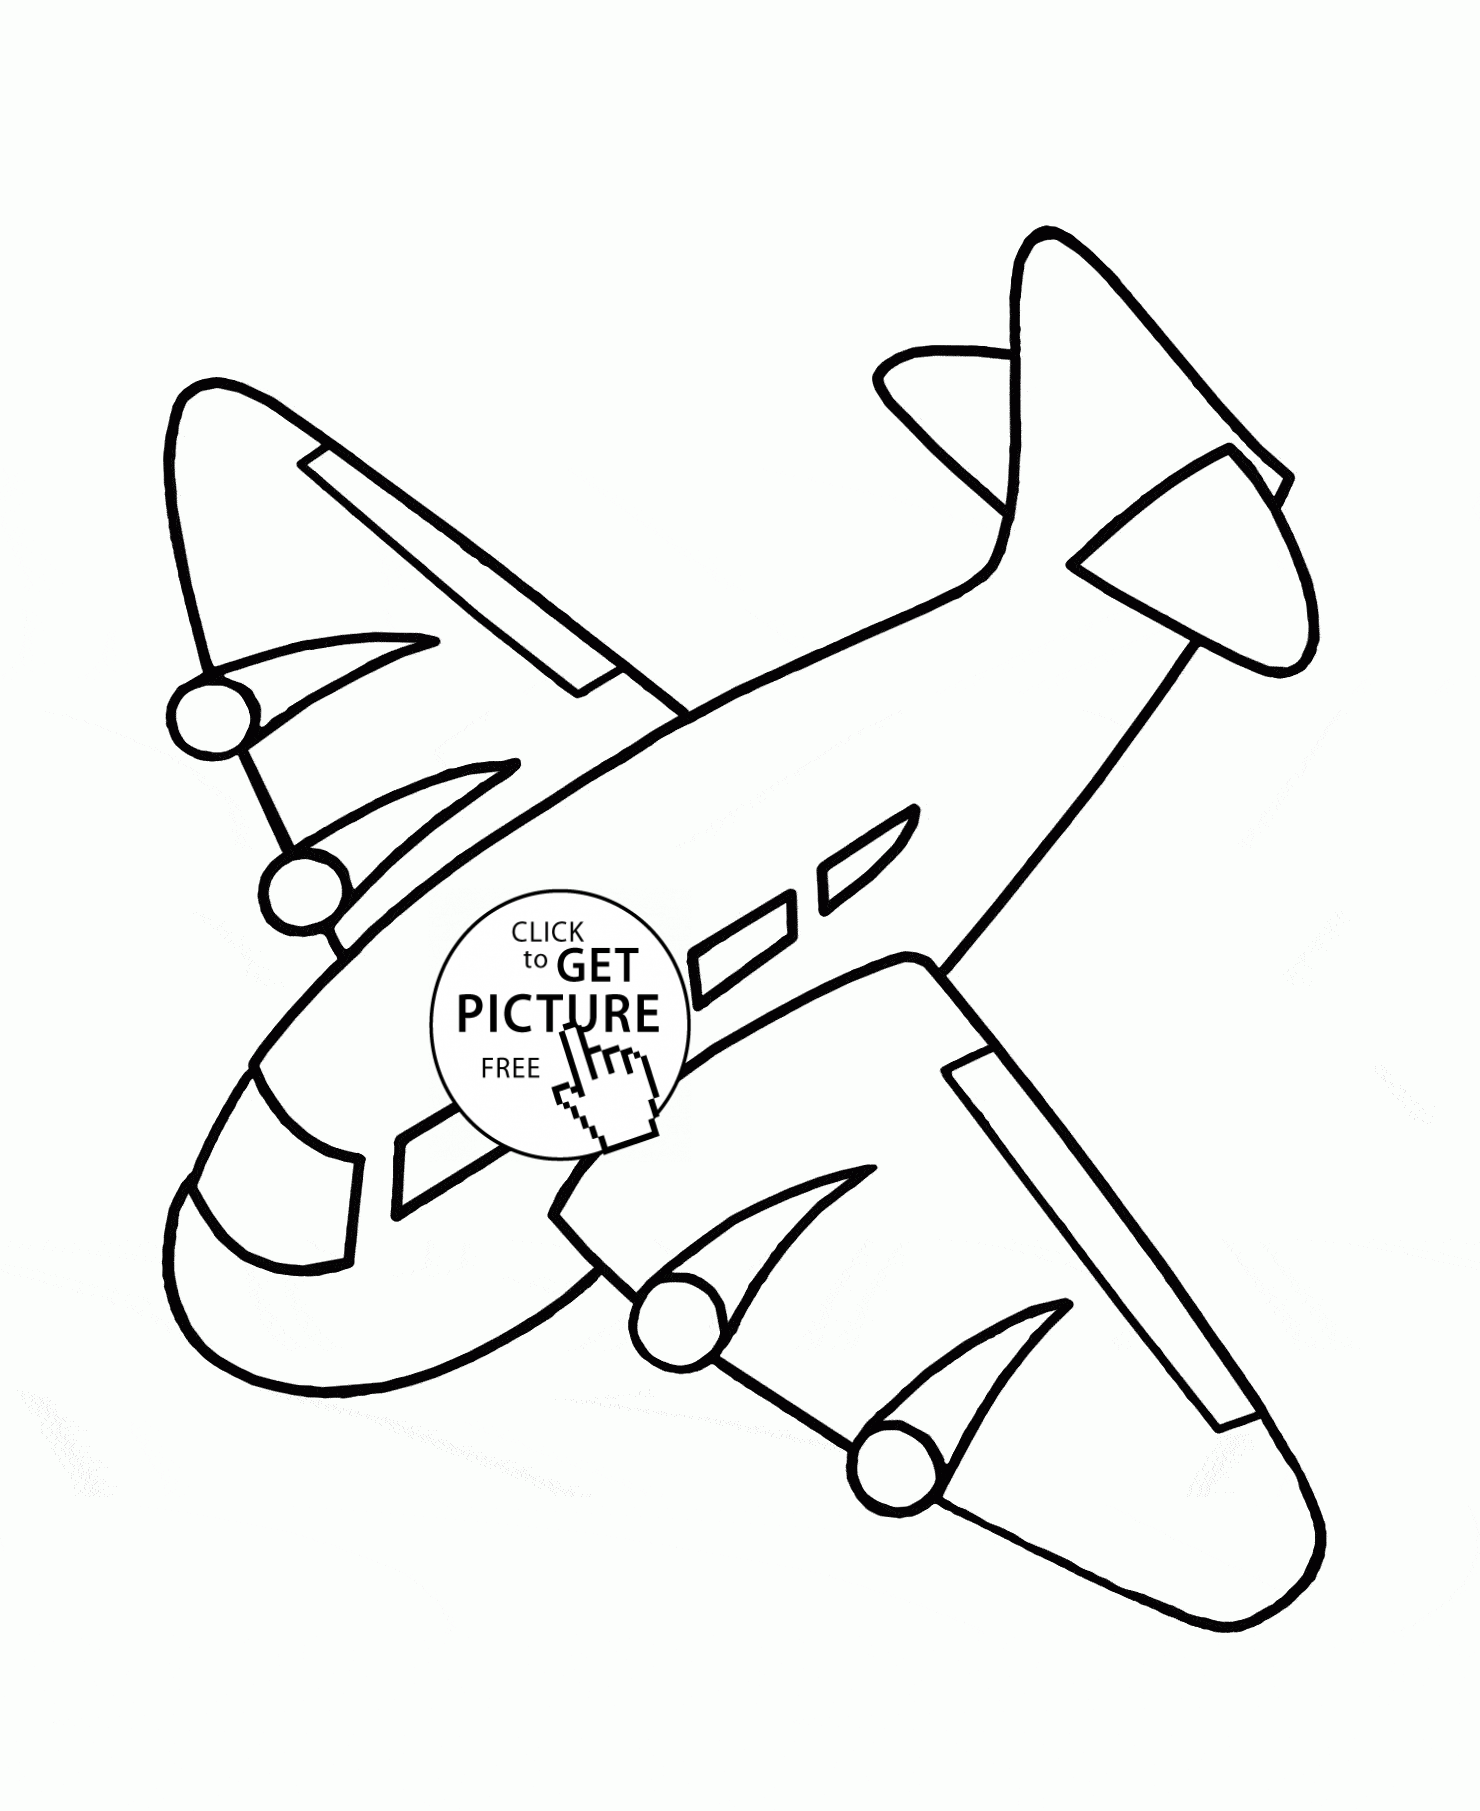 Cartoon Airplane Coloring for Kids